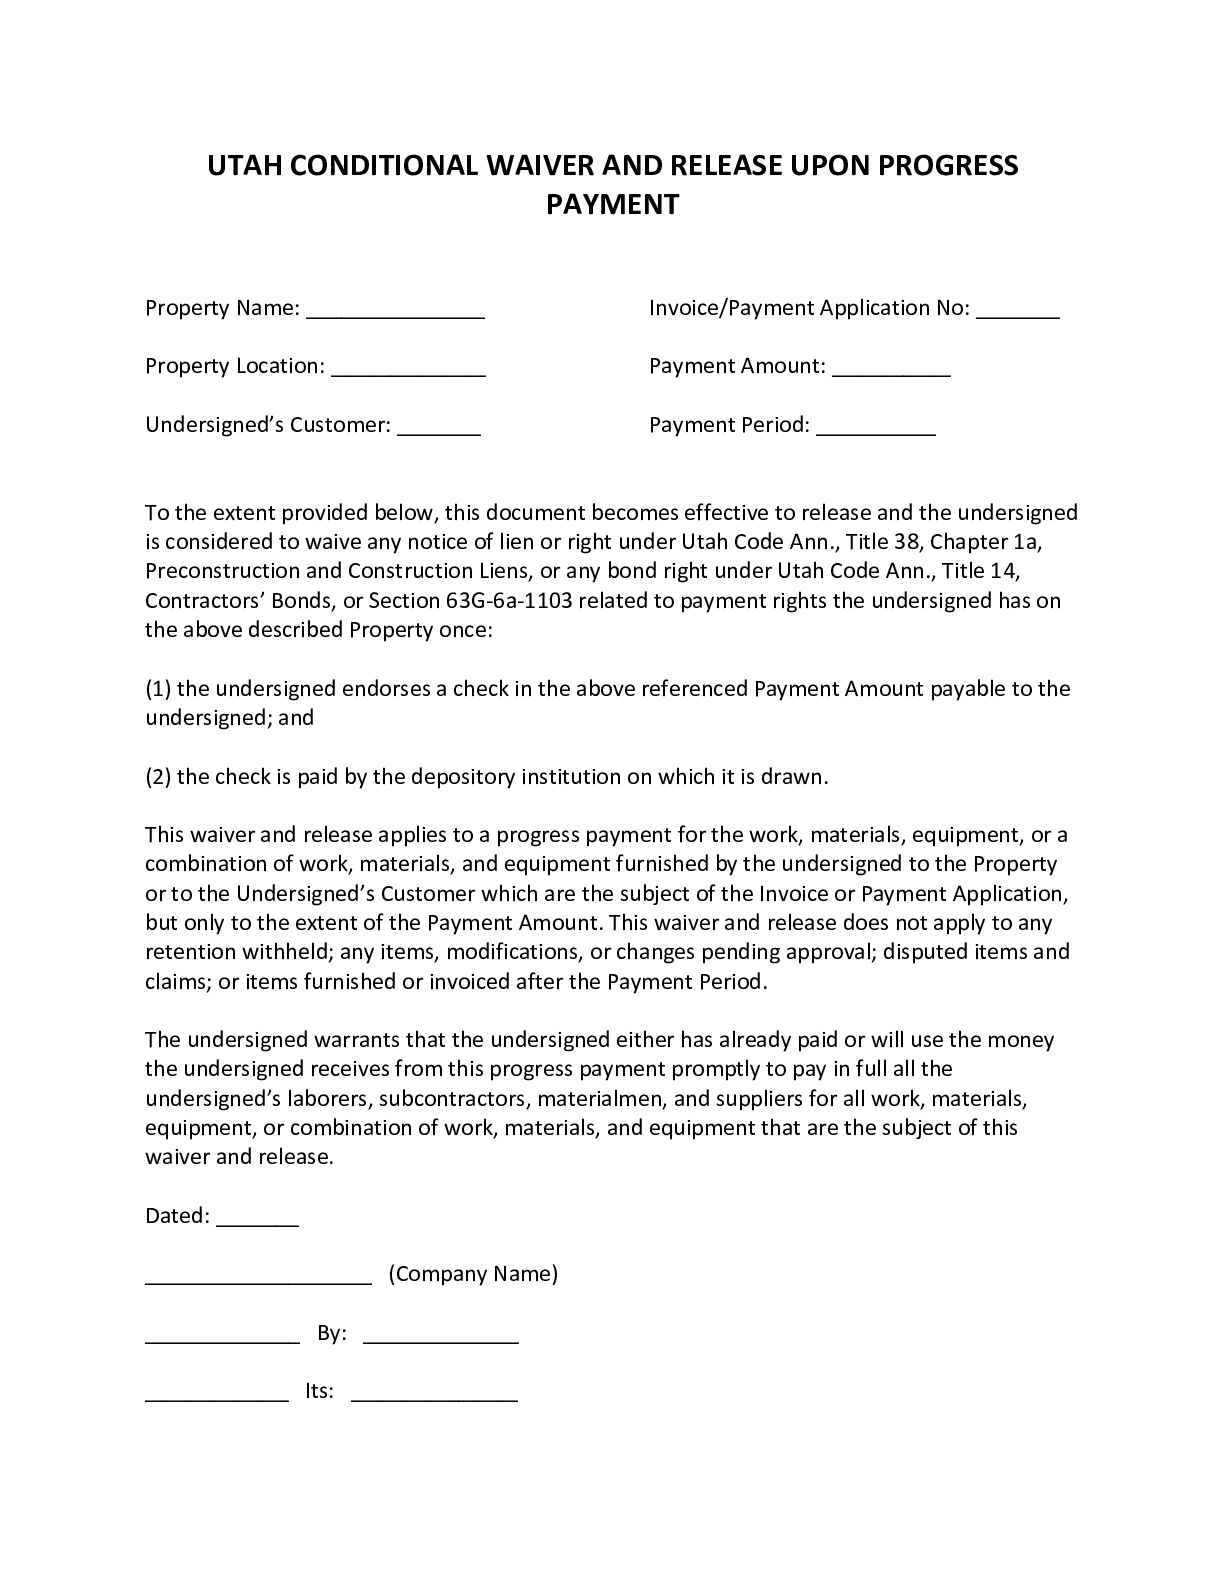 Utah Waiver and Release Upon Progress Payment Form